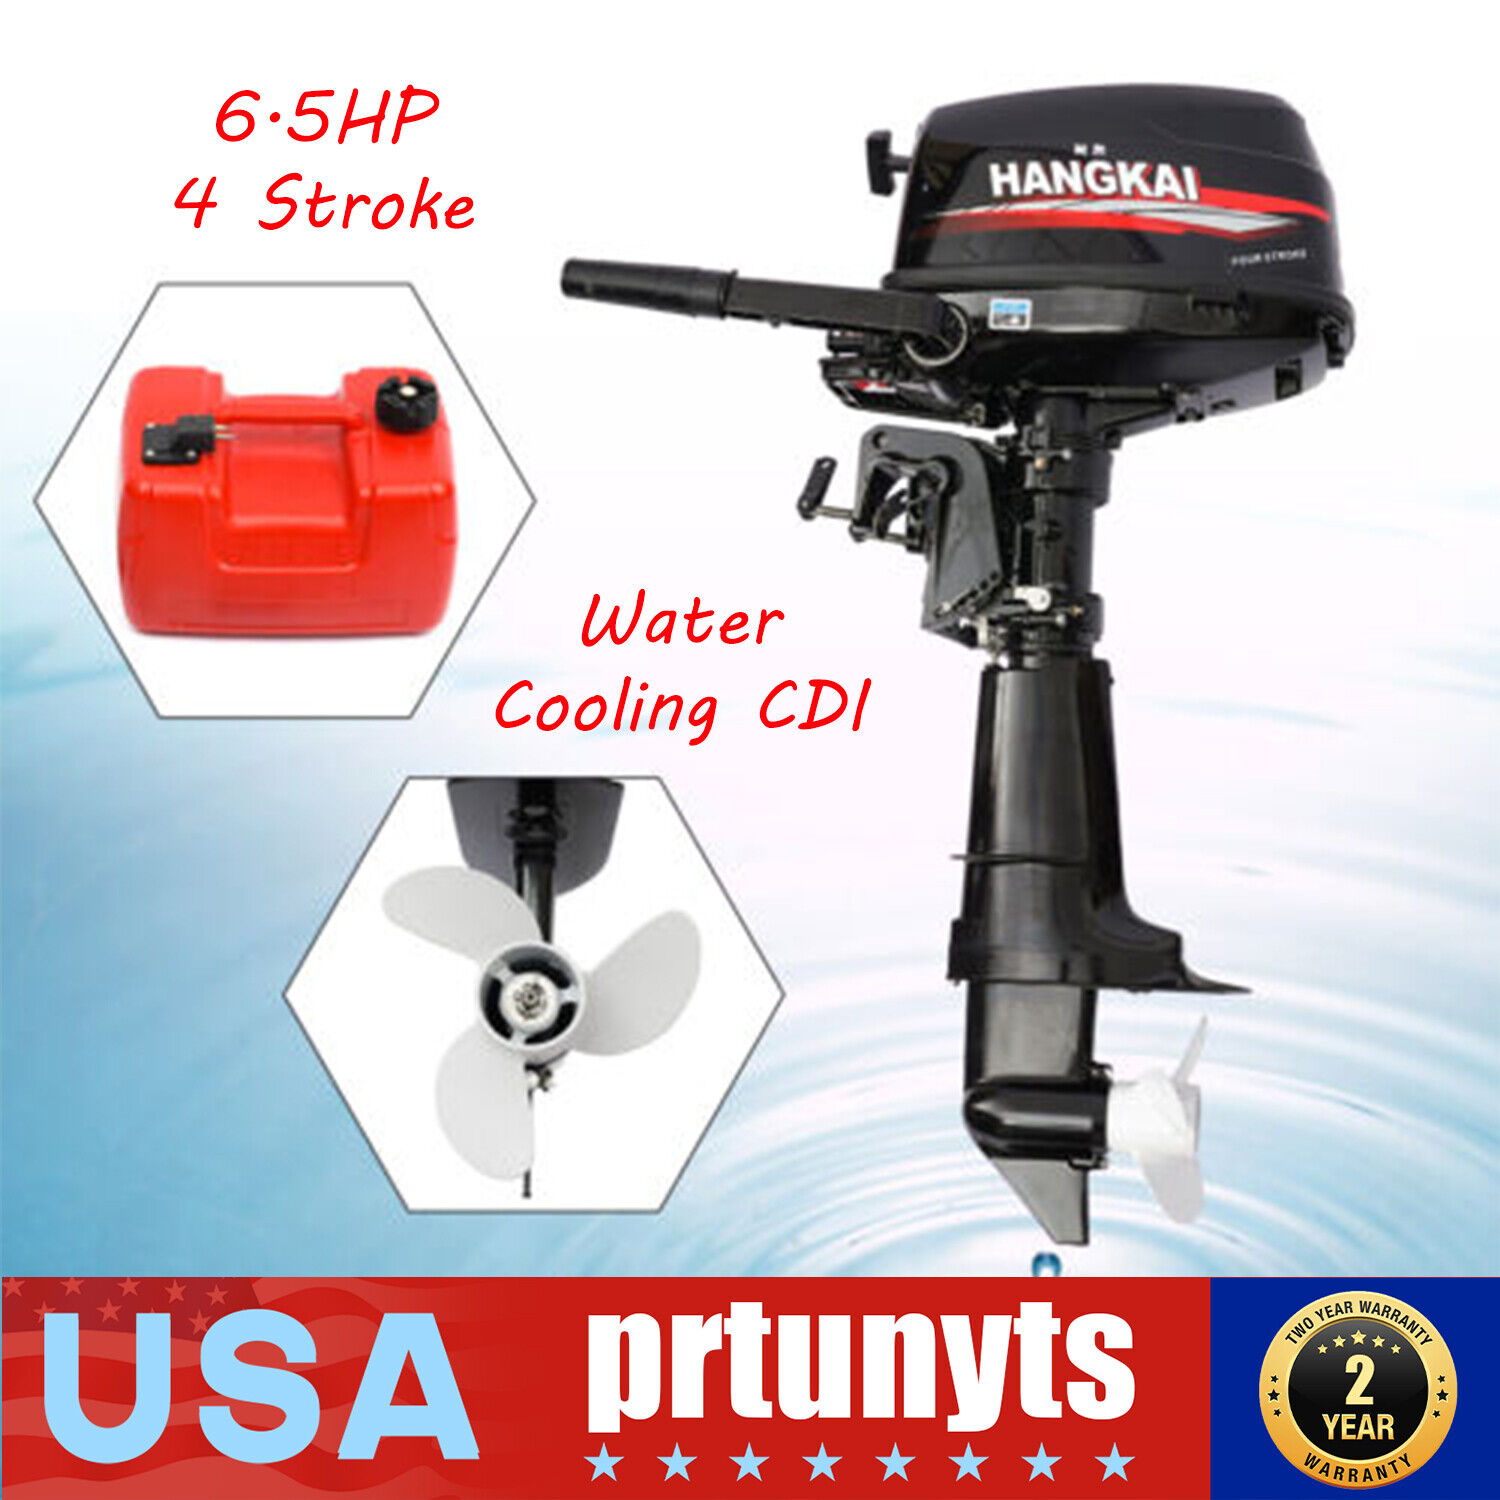 HANGKAI 6.5HP 4 Stroke Outboard Motor Marine Boat Engine With Water Cooling CDI